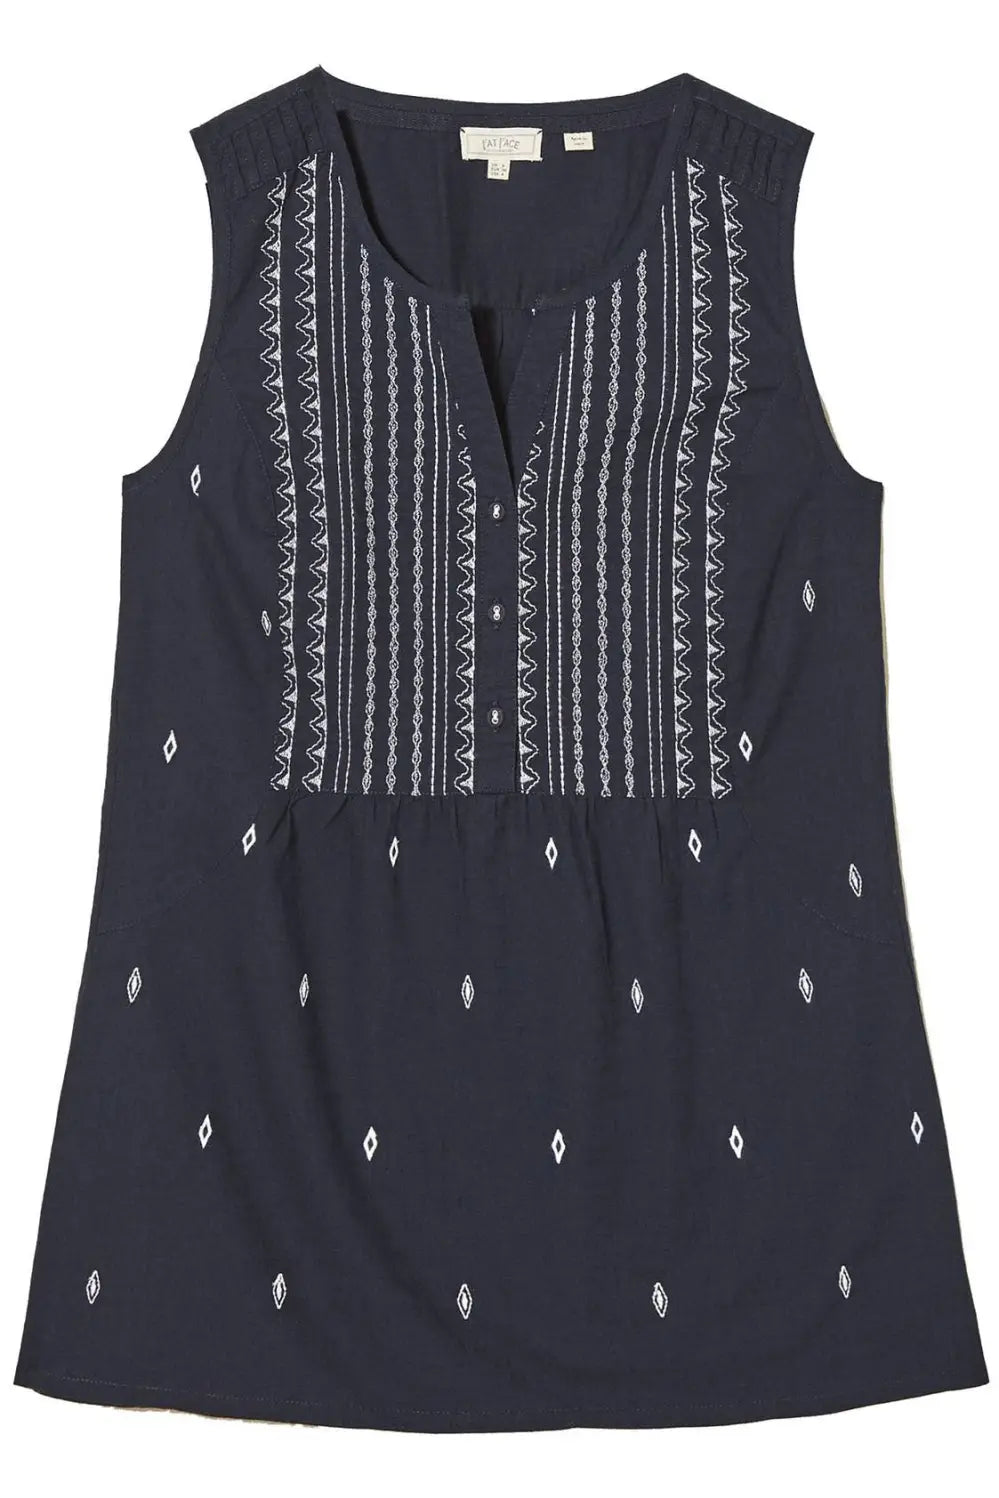 Fat Face Ikat Embroidered Sleeveless Top